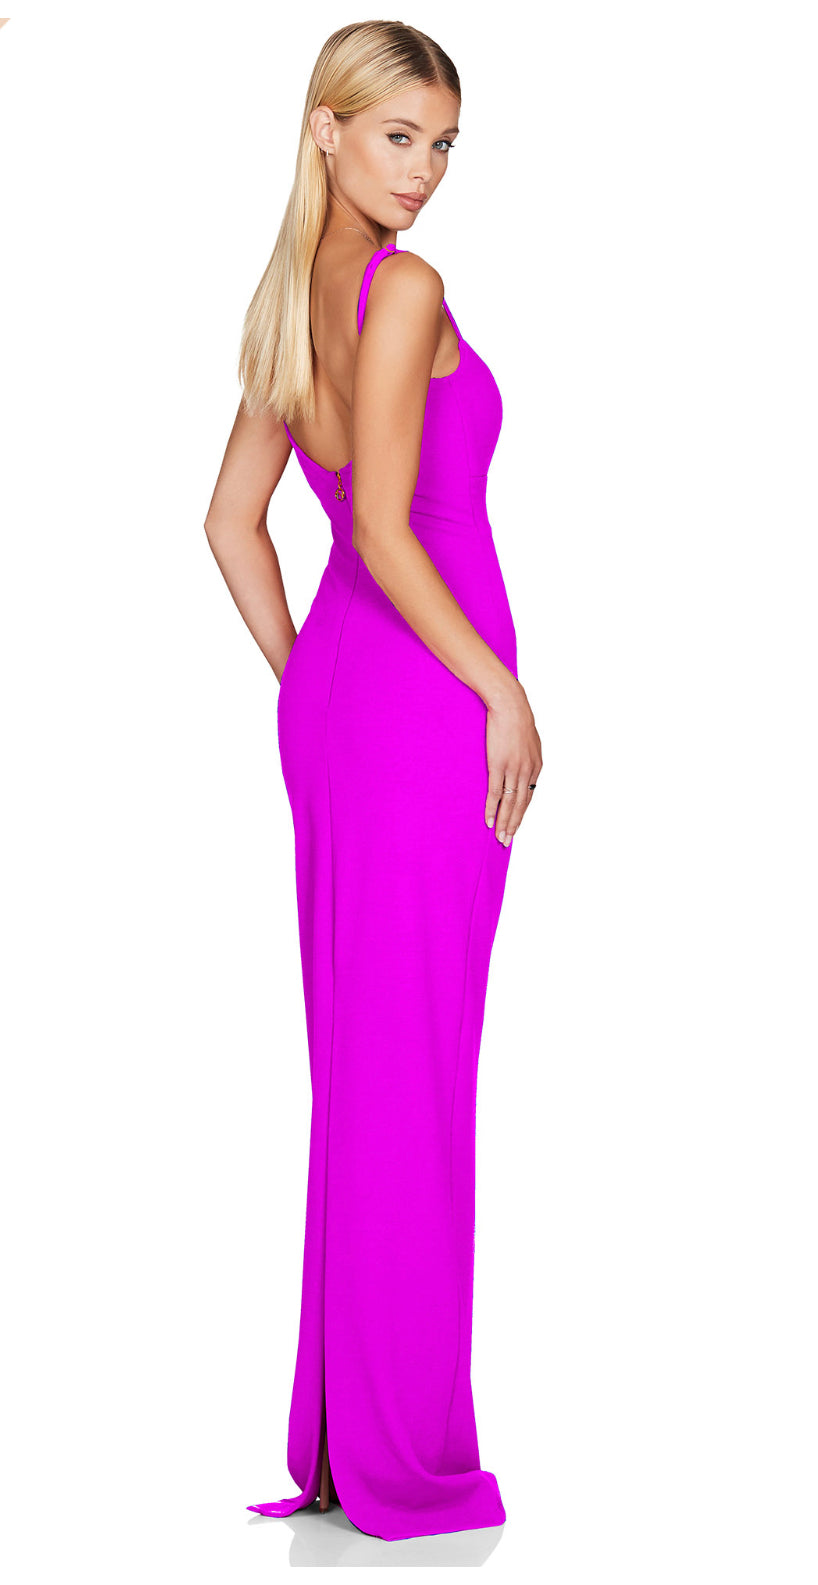 Nookie Bailey Gown in Electric Pink showing rear view with white background and midel turned looking towards the camera with side and back in view.  